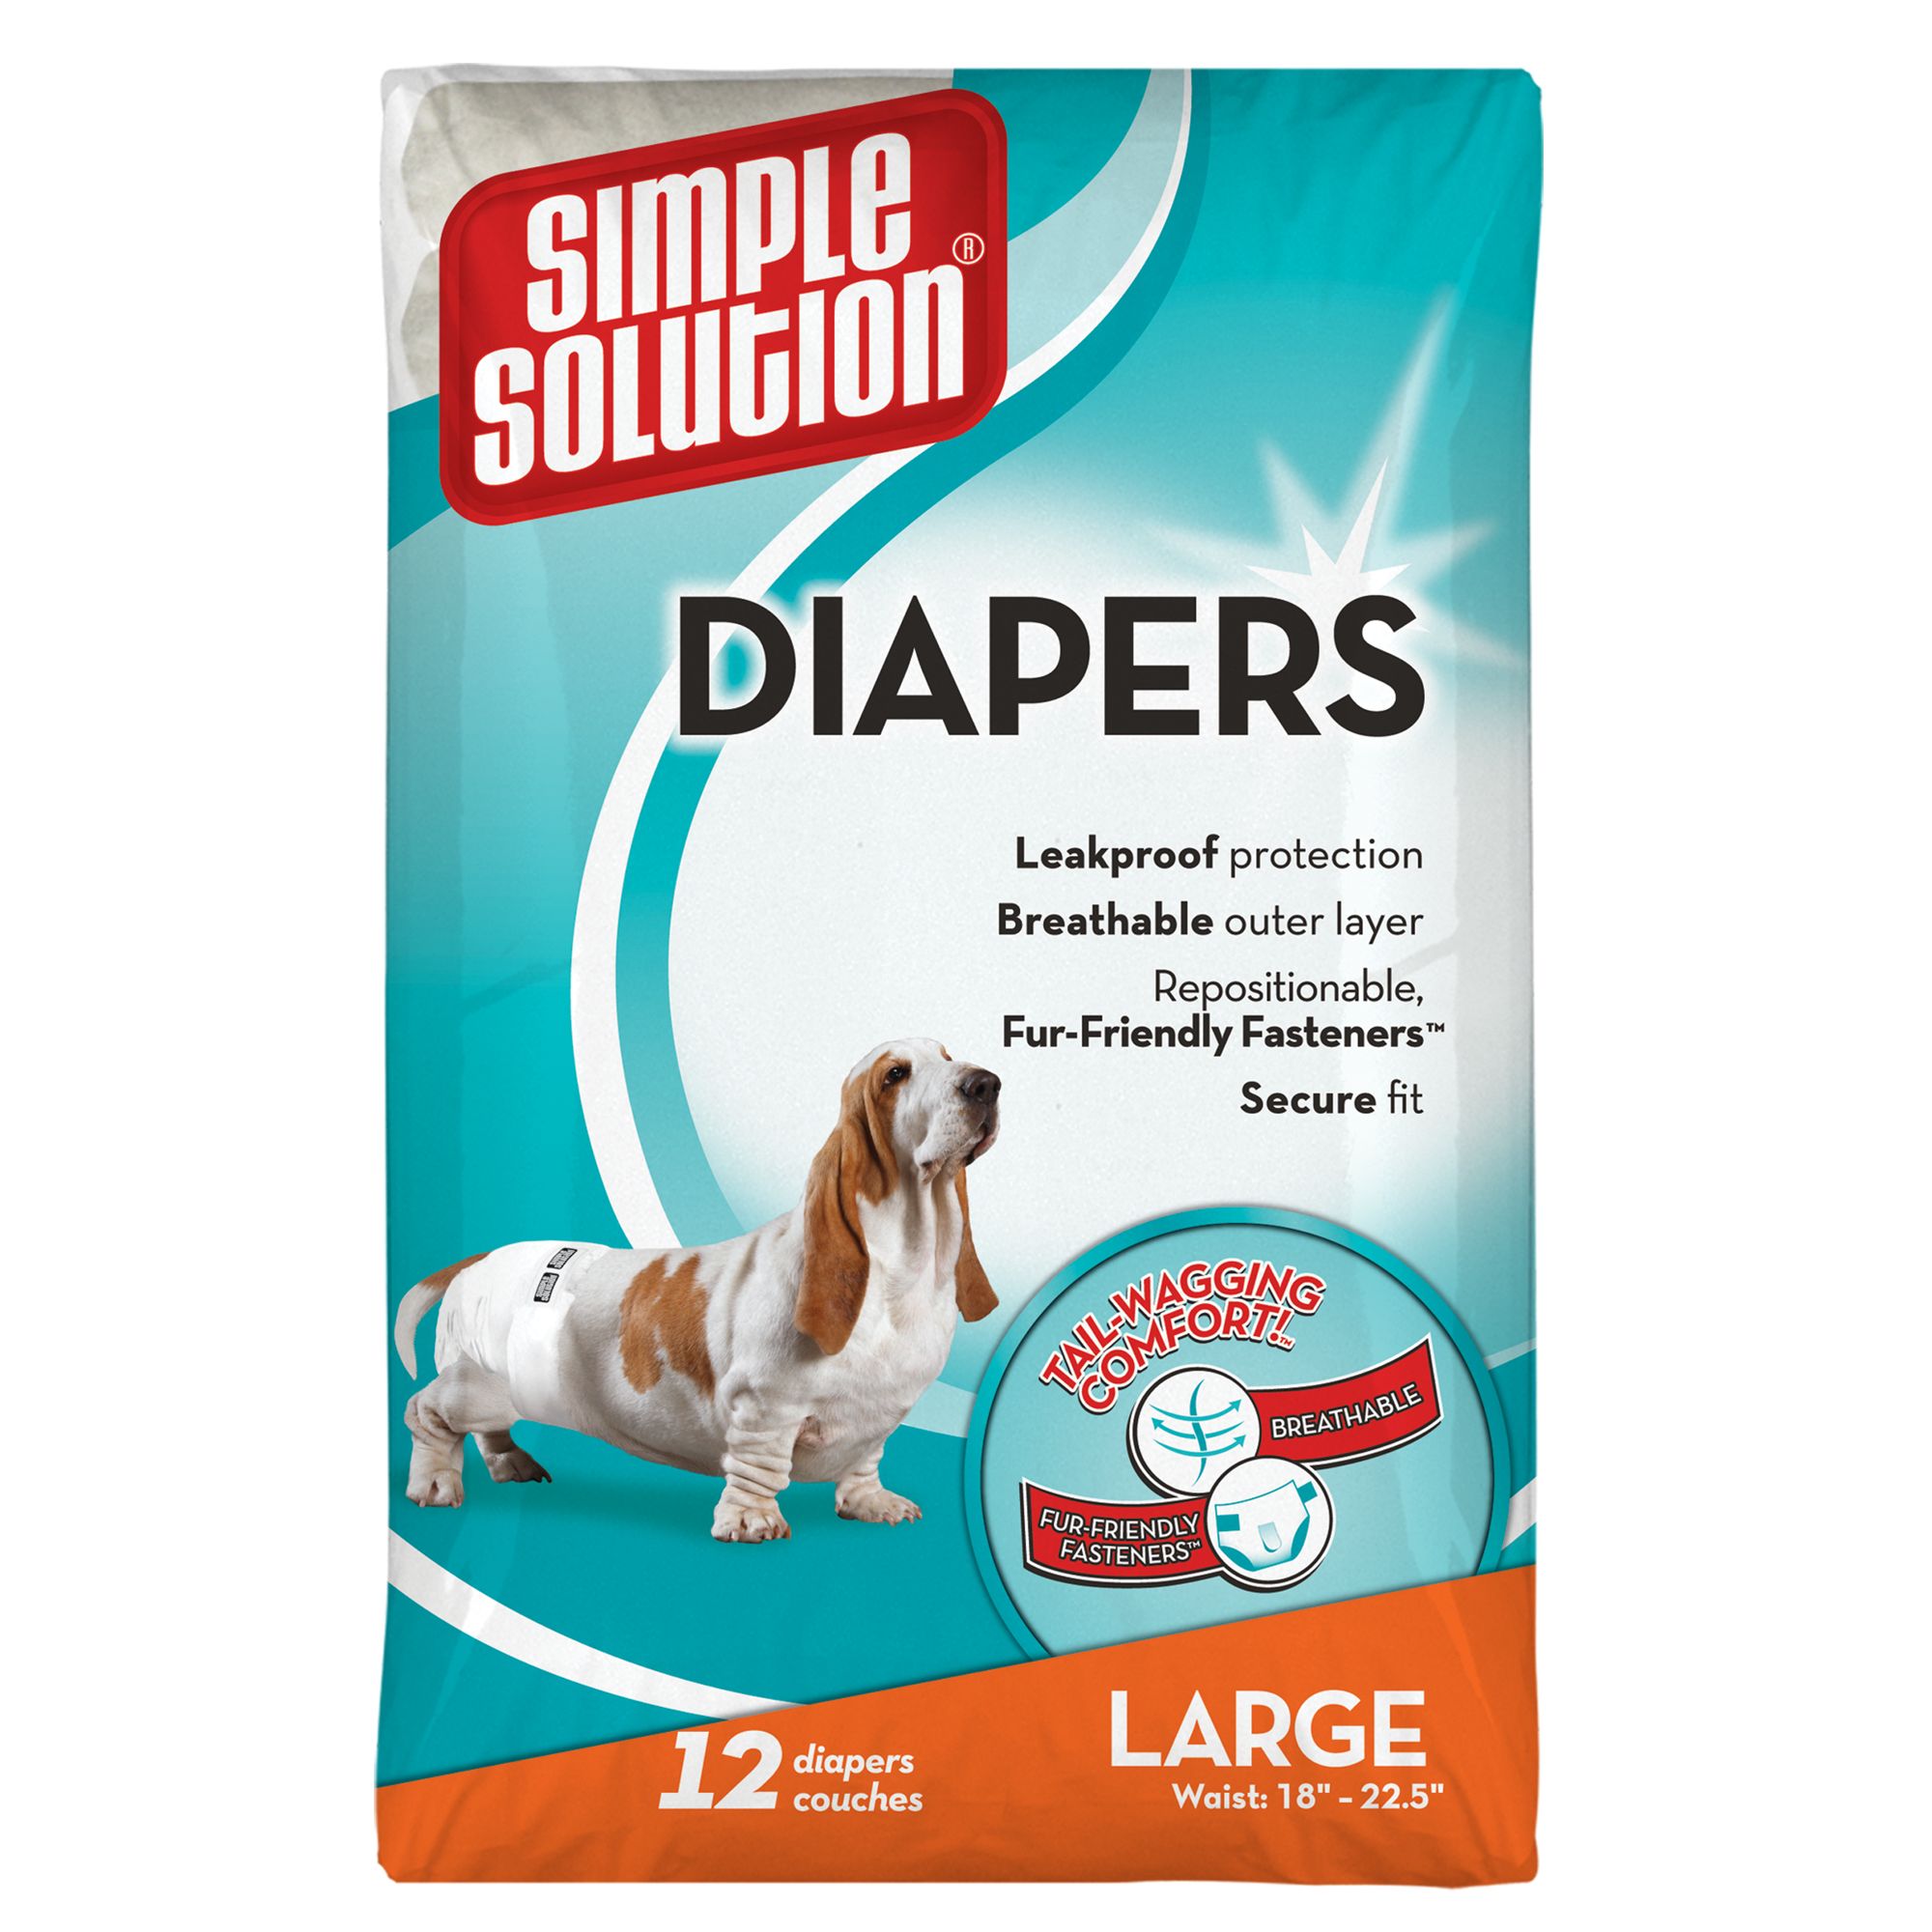 dog diapers for females in heat petsmart